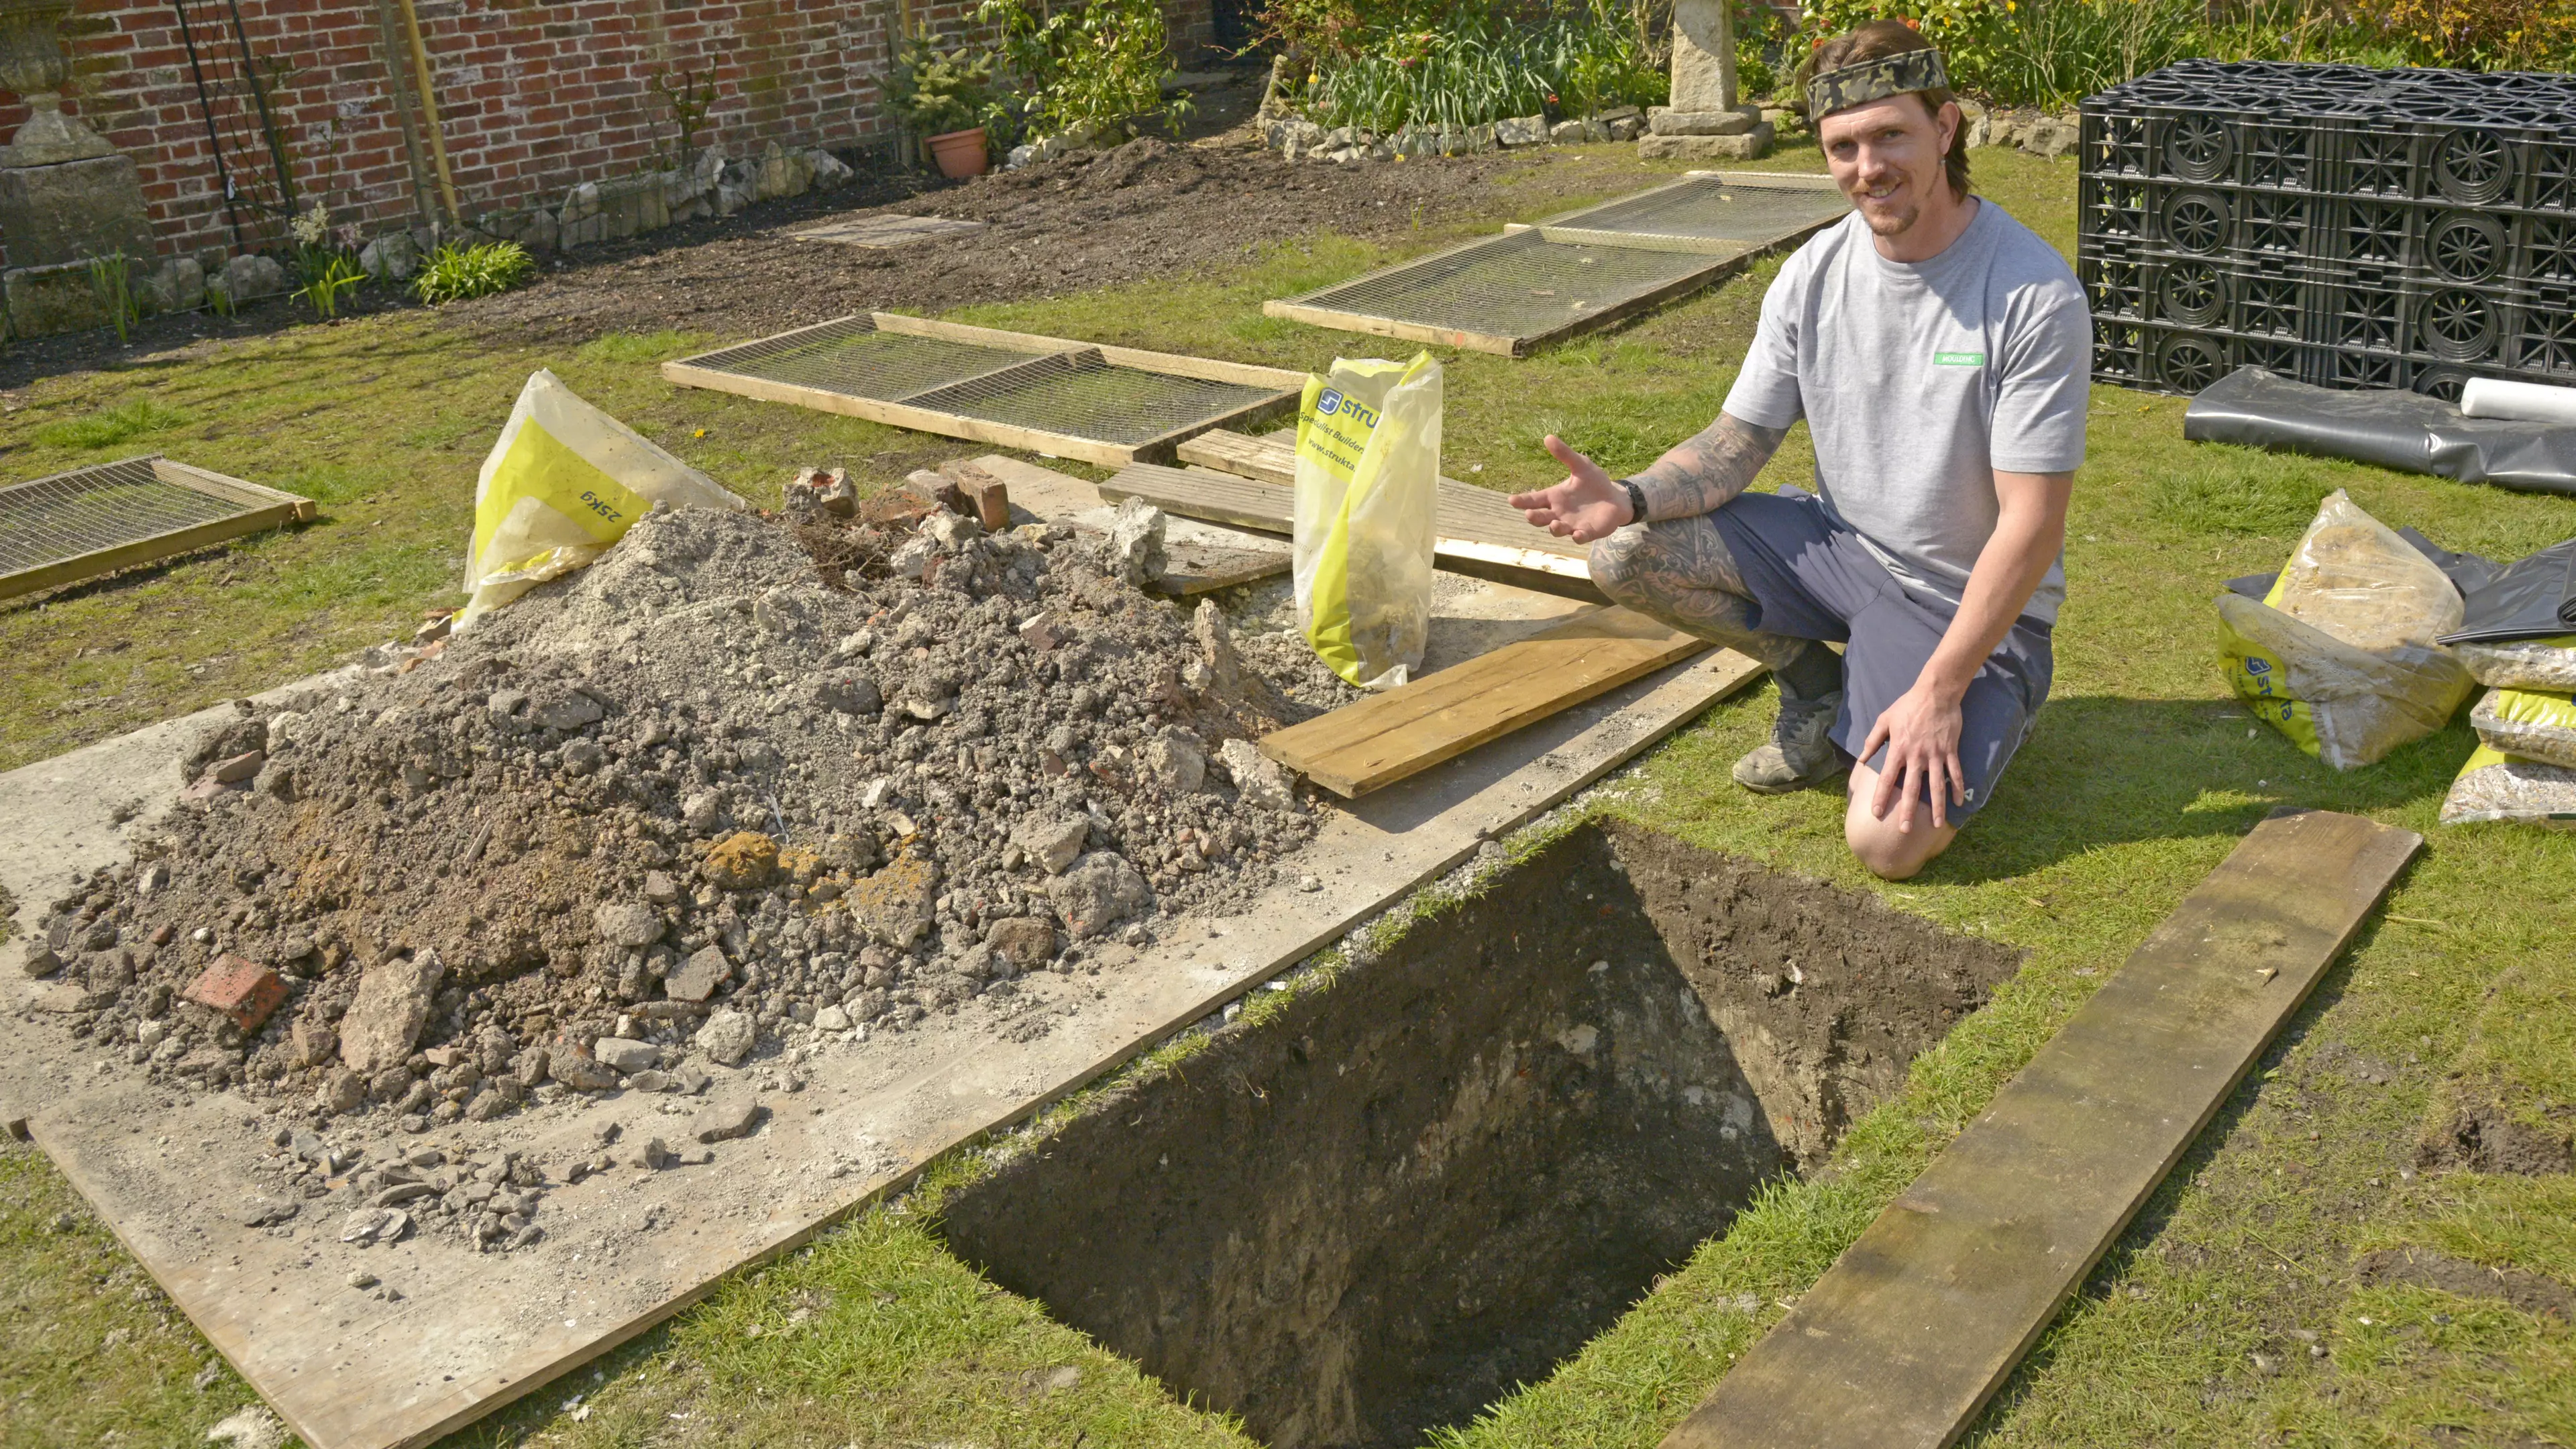 Builders Dig Up Human Remains Buried Under Patio